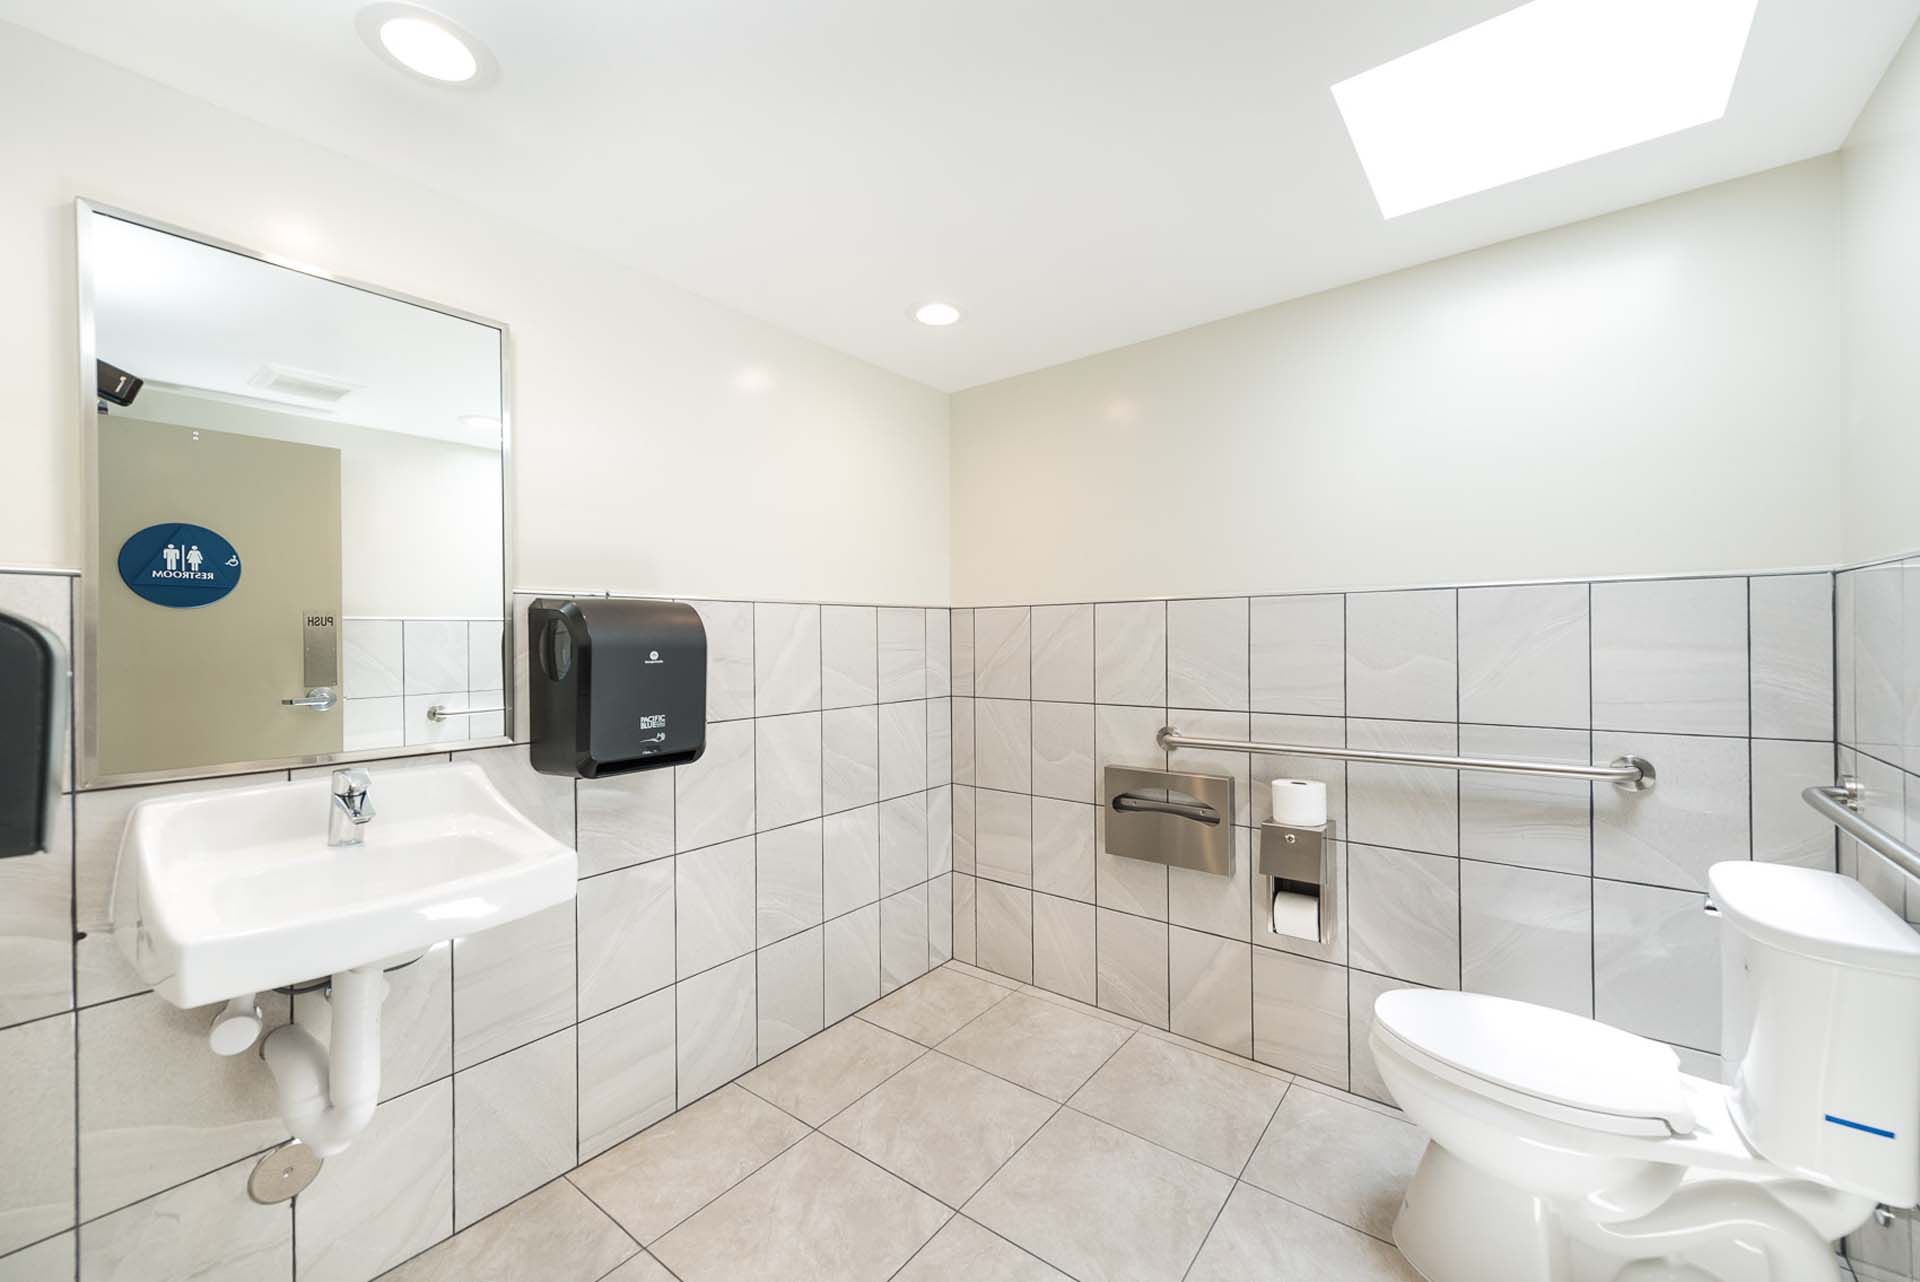 Inside large apartment complex bathroom with tan tiles.